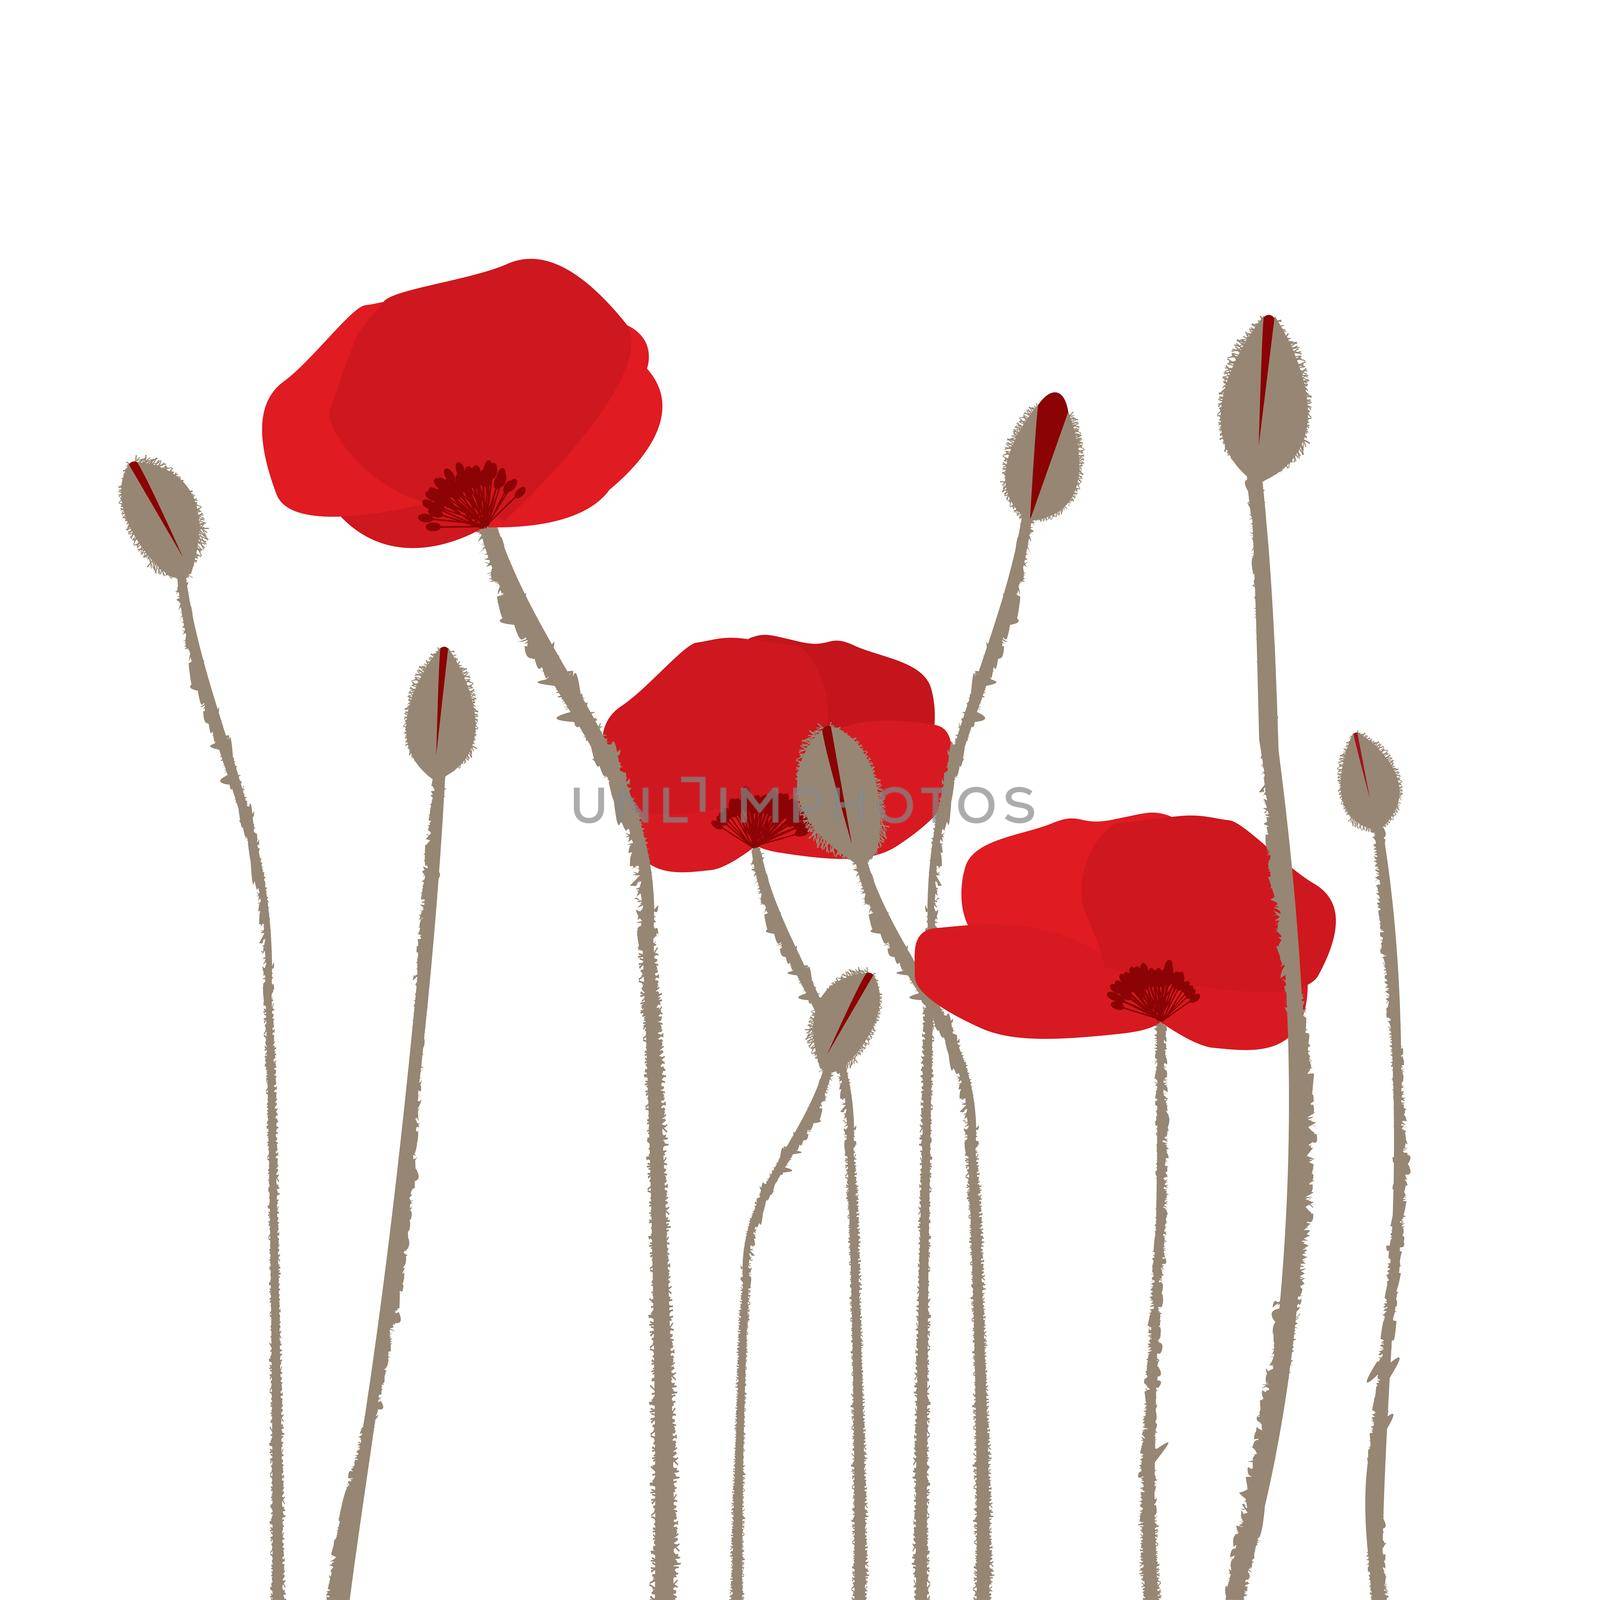 Hand drawn stylized poppies on white background